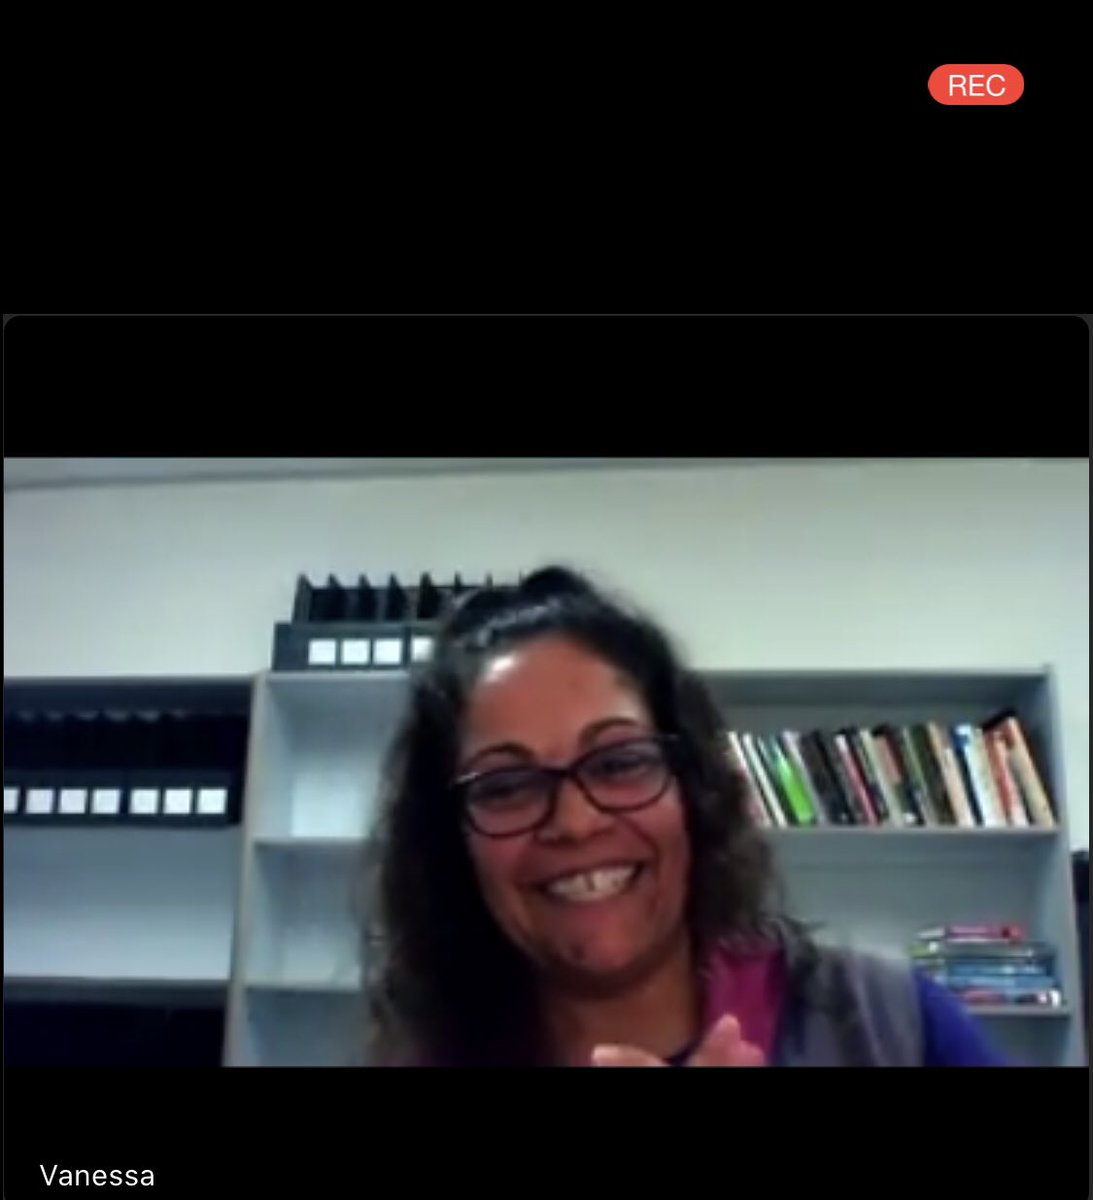 “Fire is a teacher, it demonstrates how to learn from Country” @nessscavvv presents to a huge international audience on #CulturalBurning as part of the @PyroLife_ITN International Symposium! #PyroLifeWebinars